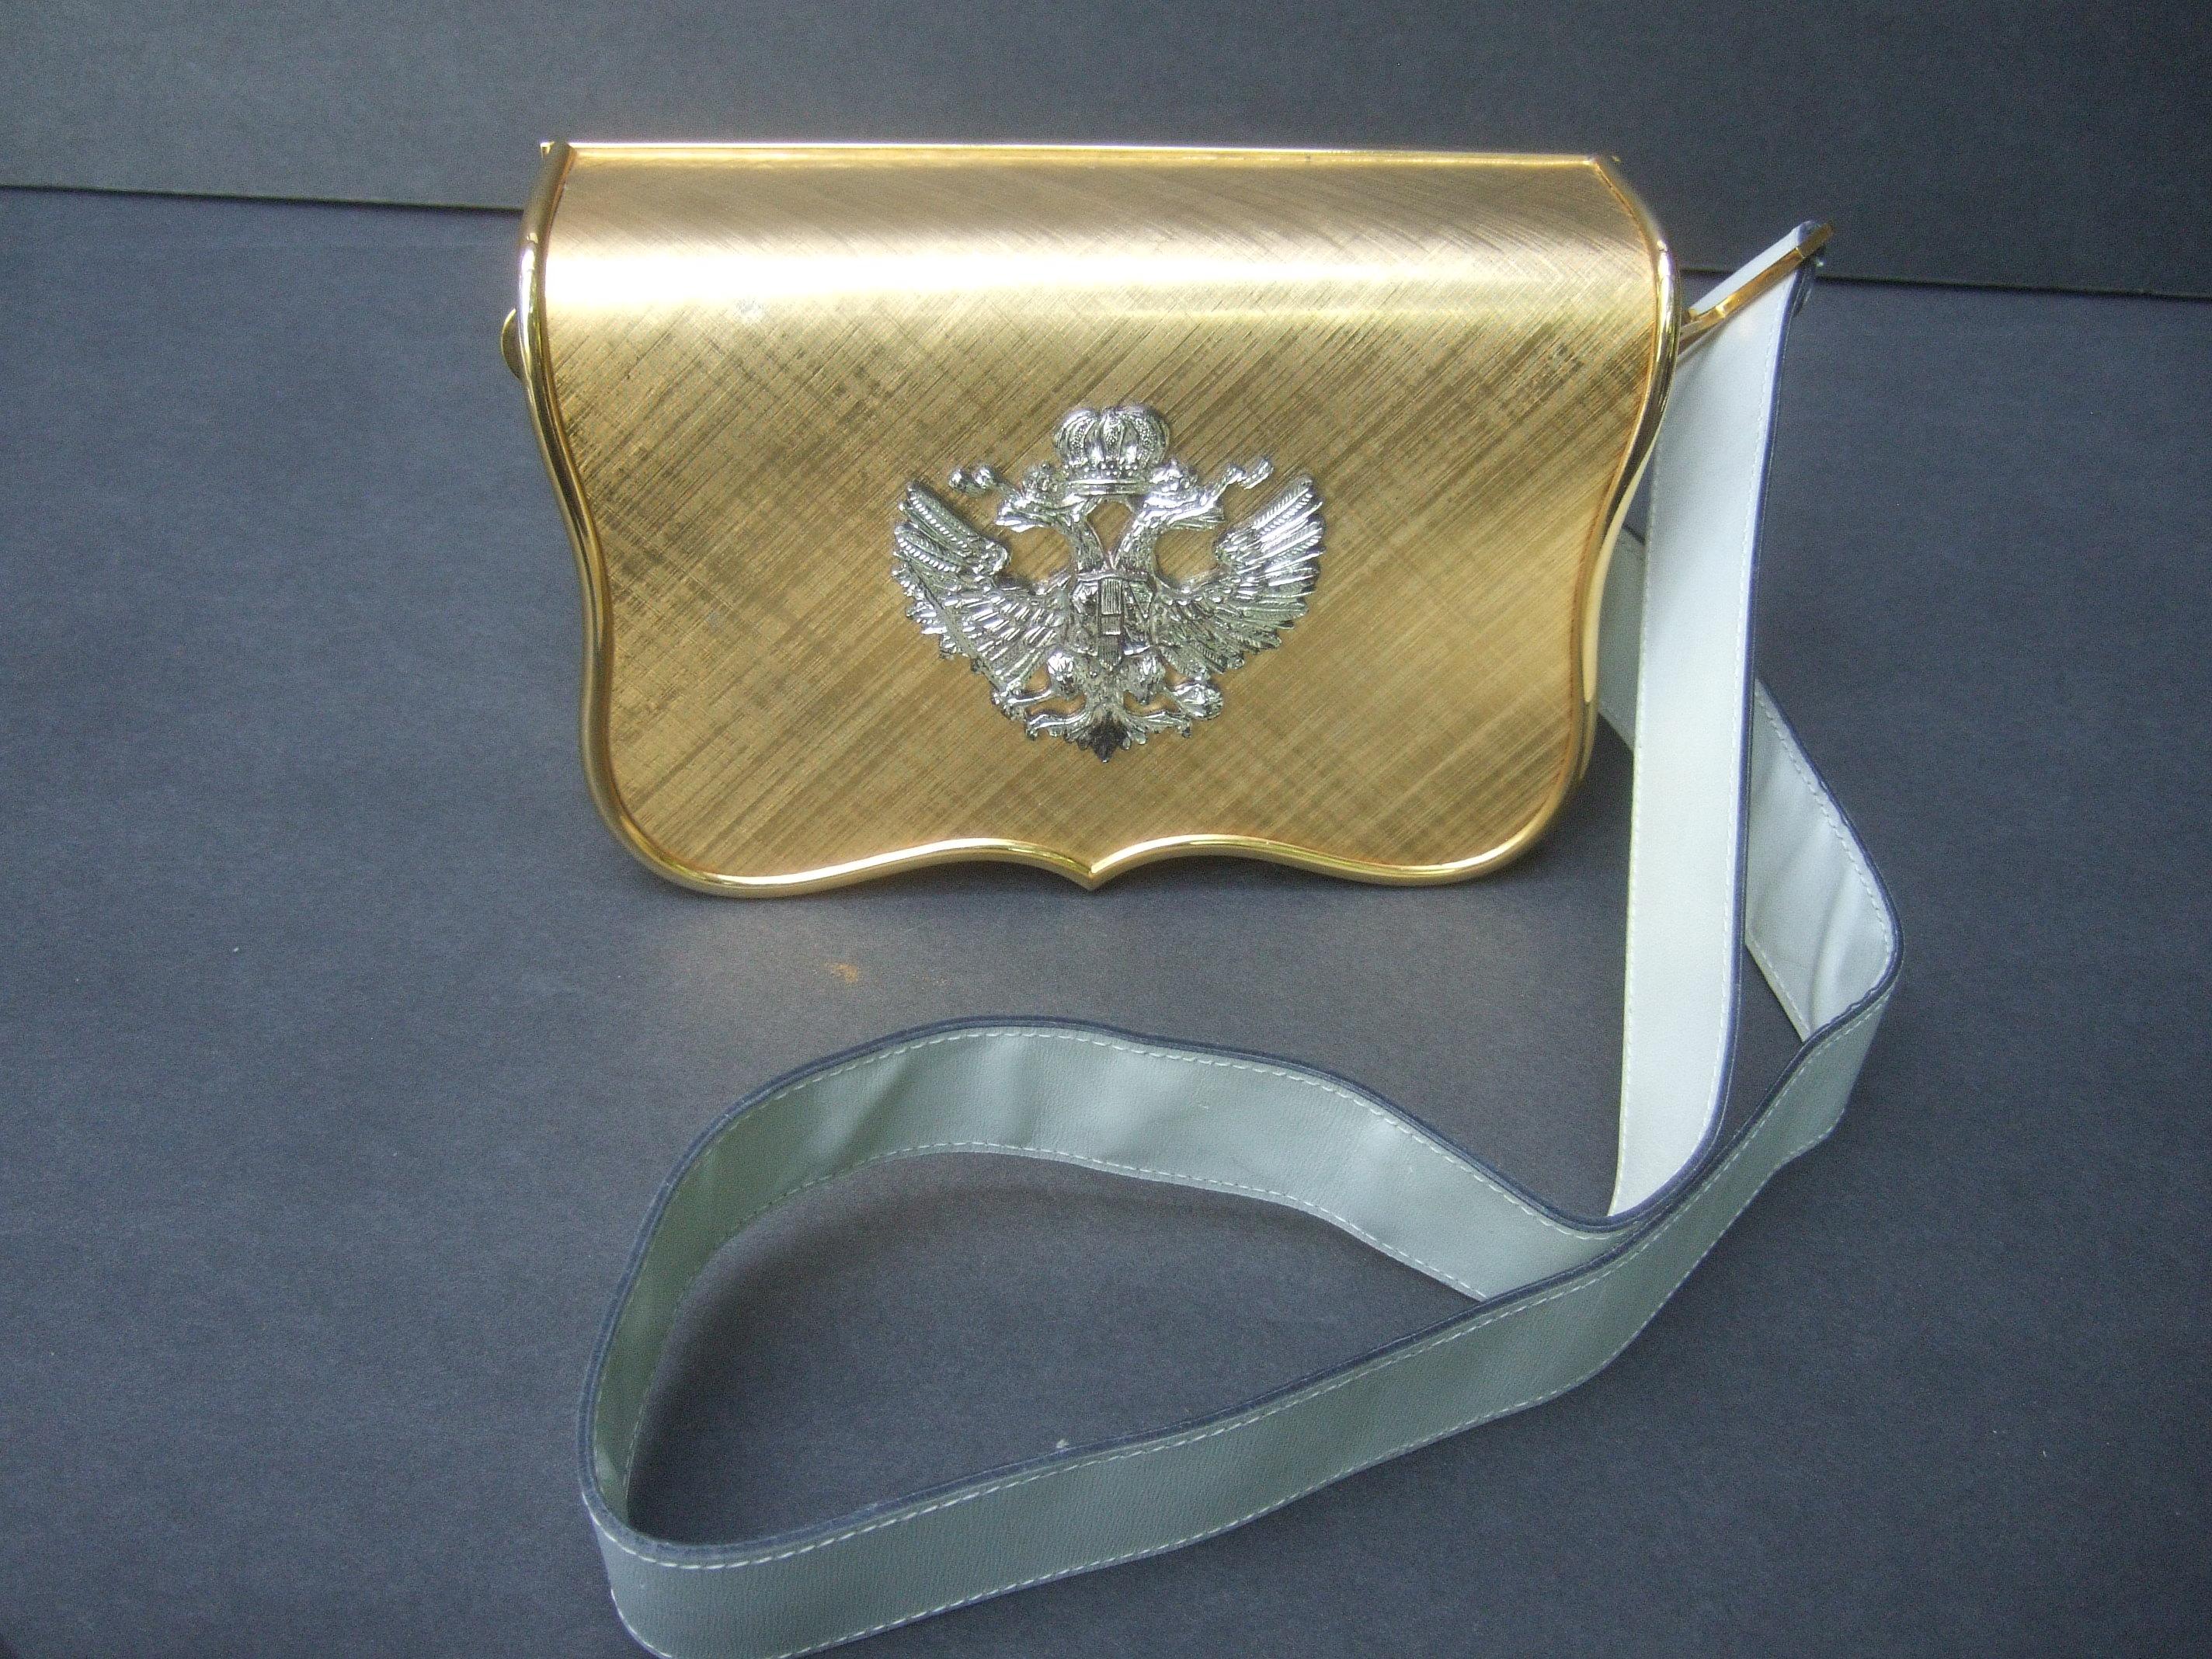 Saks Fifth Avenue Italian gilt metal eagle emblem white leather shoulder bag c 1970s
The unique handbag is adorned with an ornate silver metal double headed eagle
medallion mounted onto the brushed gold metal flap cover

The structured gilt metal